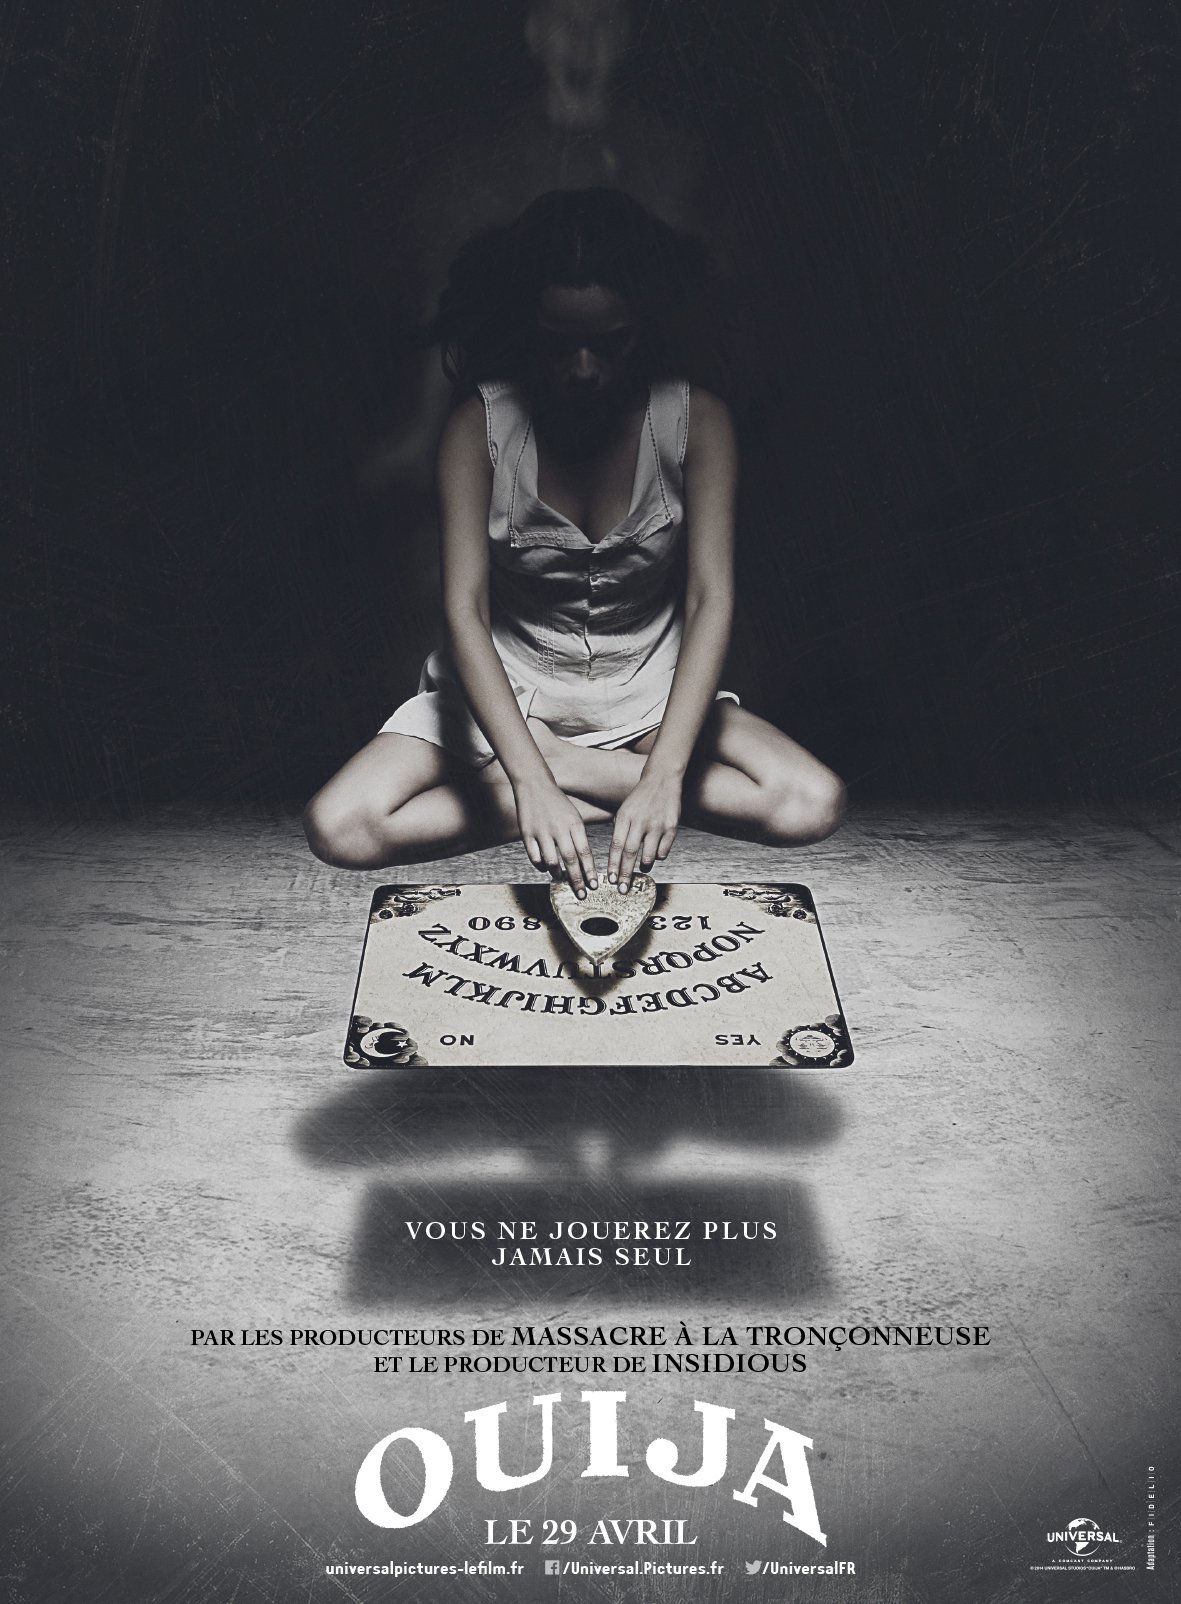 Poster for the movie "Ouija"